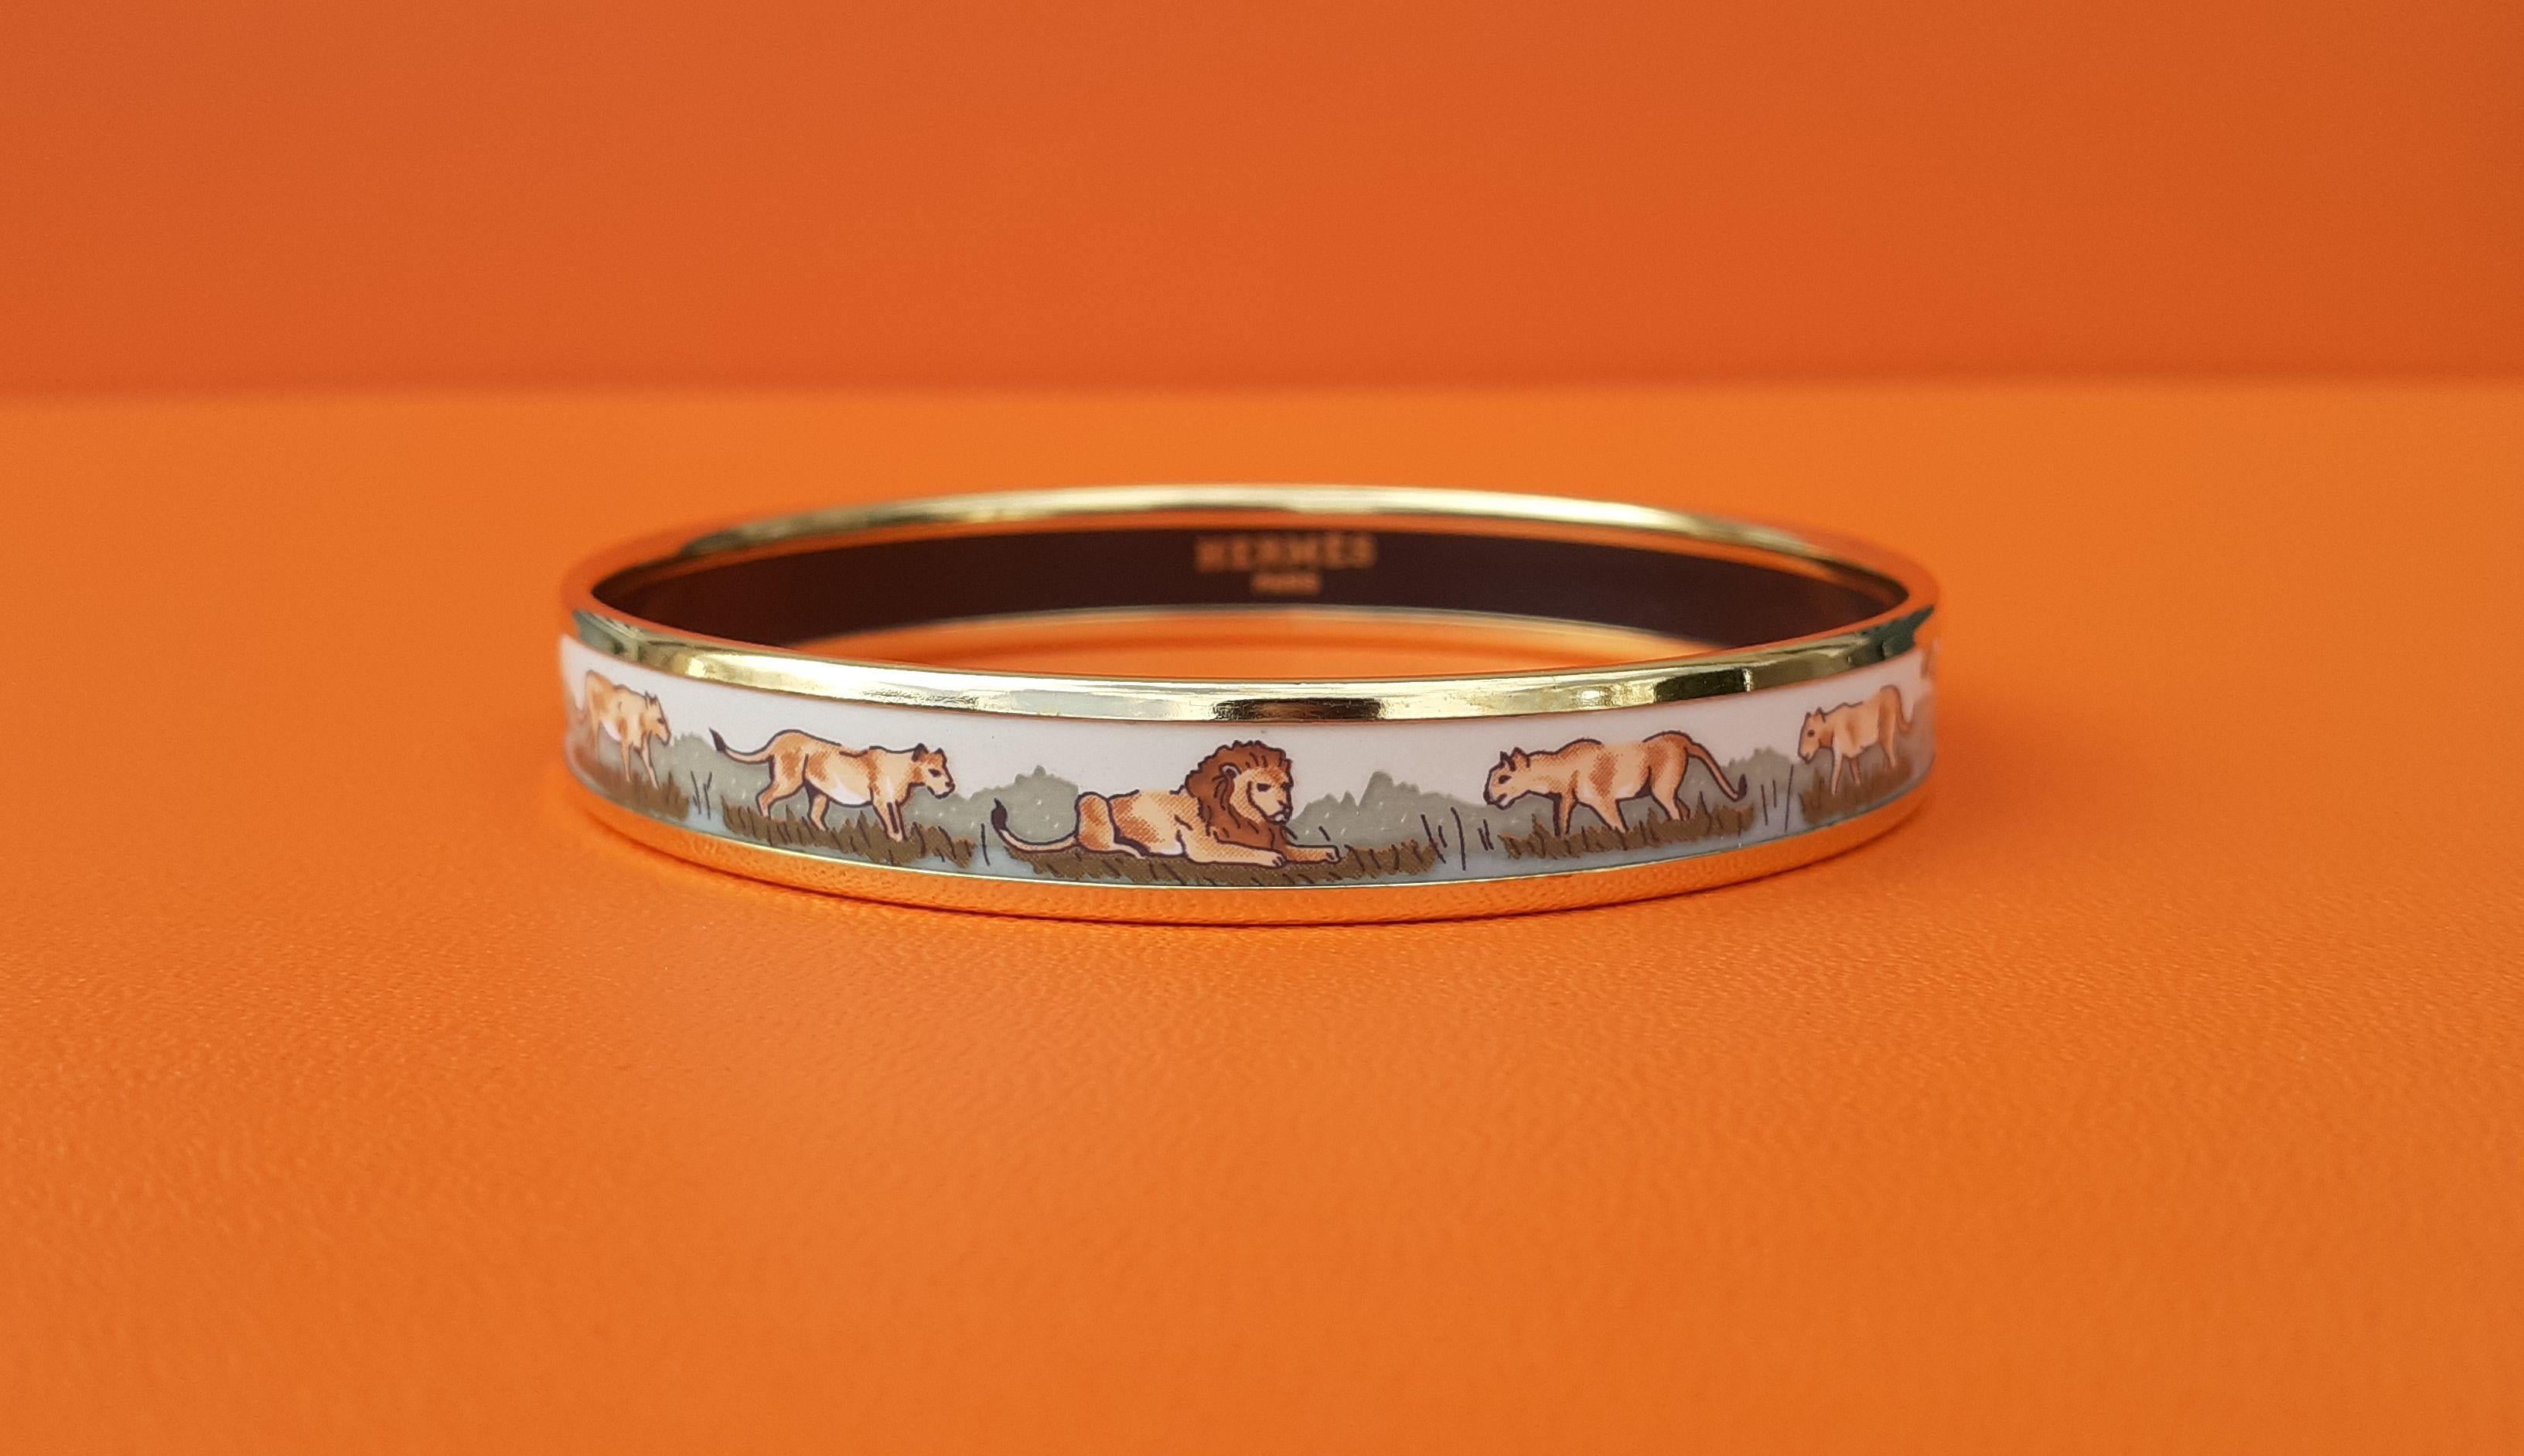 Beautiful Authentic Hermès Bracelet

Print: Lions and lionesses in Savannah

Theme: Africa, wild animals, jungle, savannah

Made in Austria + B (1998)

Vintage Bracelet

Made of printed enamel and yellow gold plated hardware

Colorways: beige,